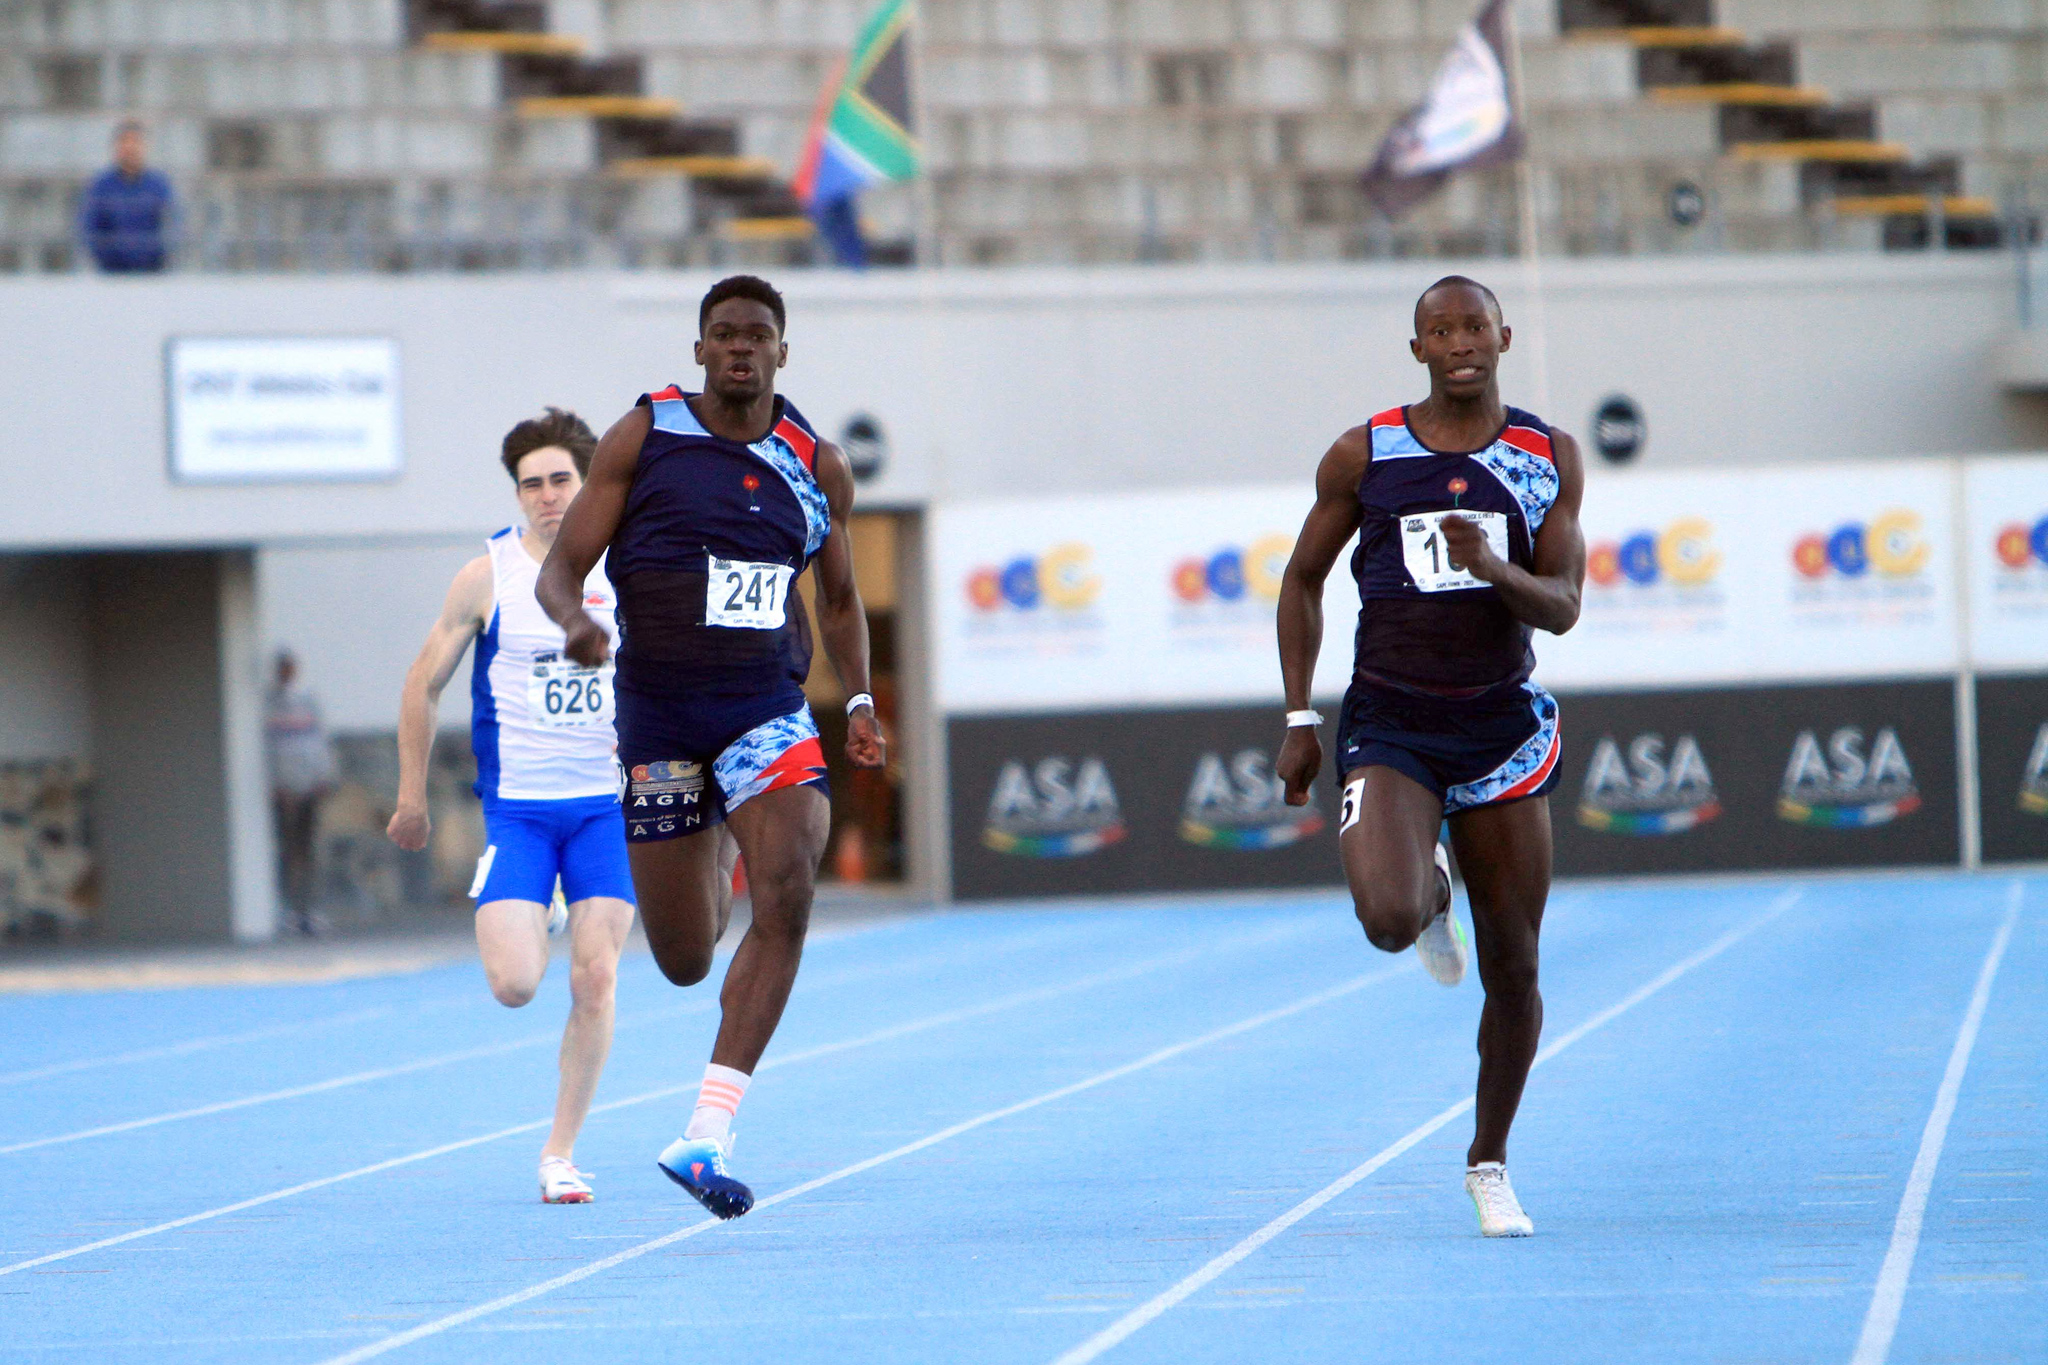 Sinesipho Dambile (right) was crowned new men’s 200m champion after clocking 20.55 at the ASA Senior Track and Field National Championships at Green Point Athletics Stadium, Cape Town on Saturday 23 April 2022 / Photo credit: Tladi Khuele